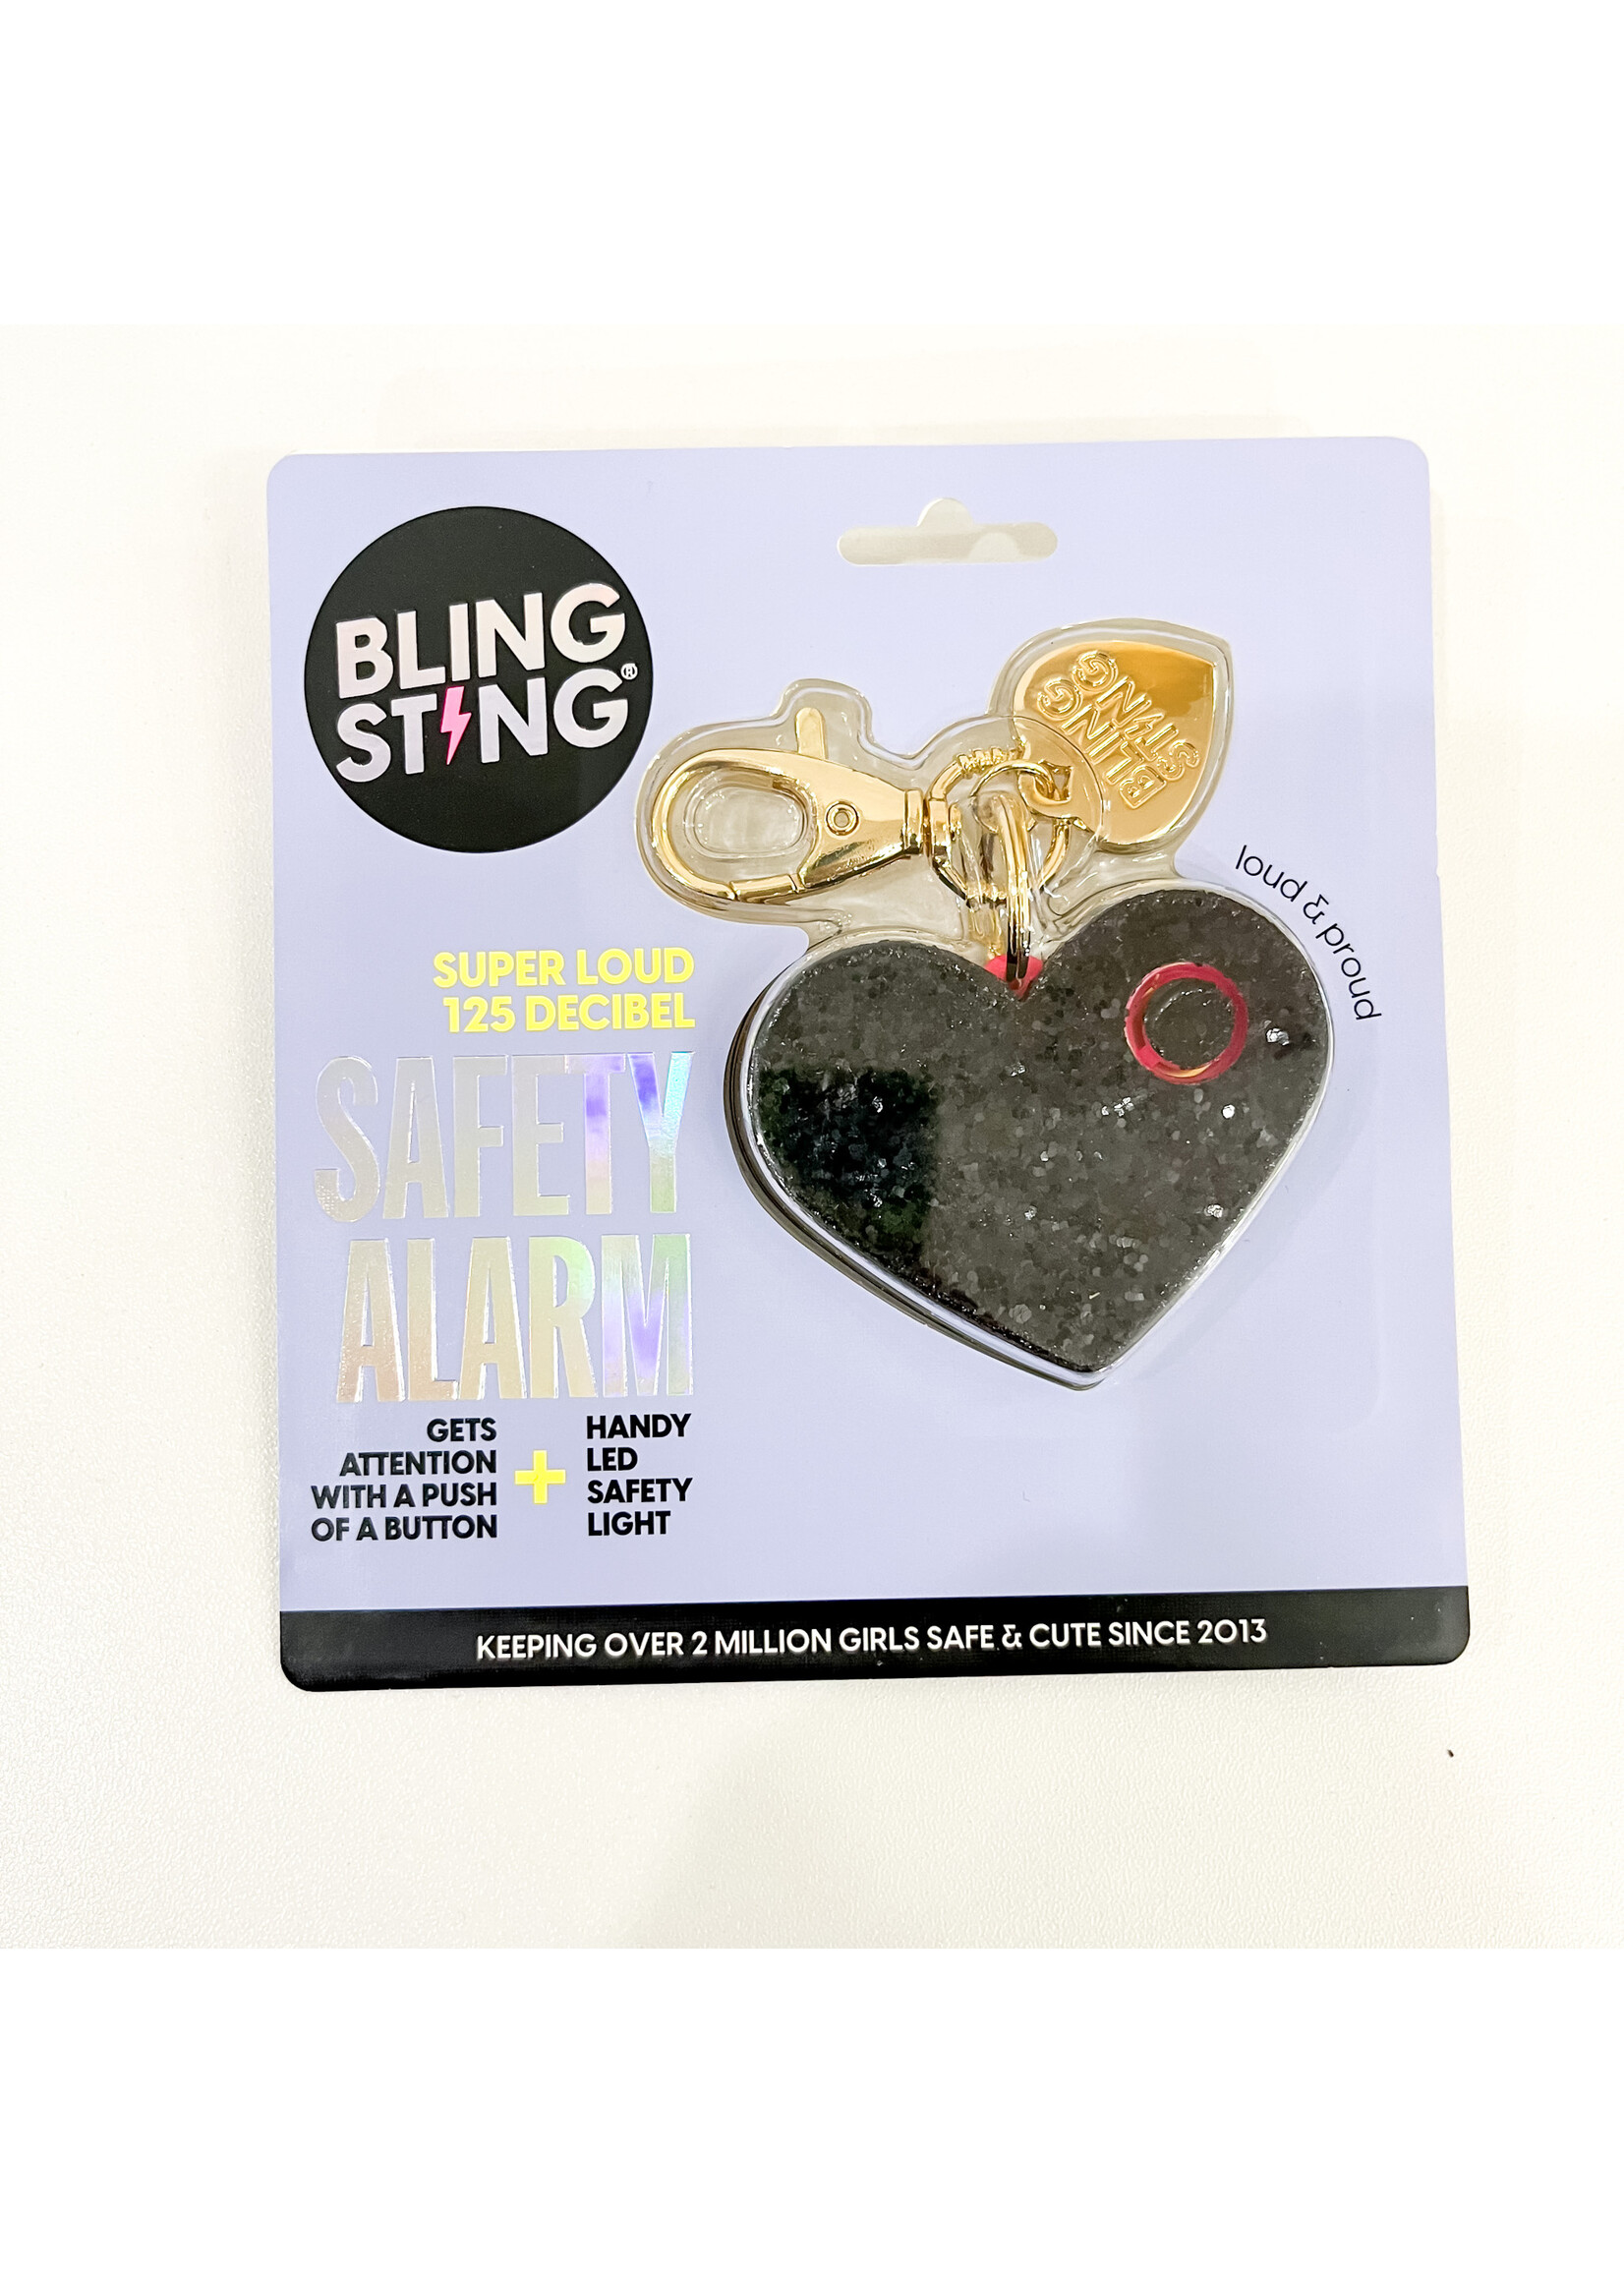 Bling Sting Mini Personal Alarm - Grey Camo - Ramsey Rae by The Magnolia